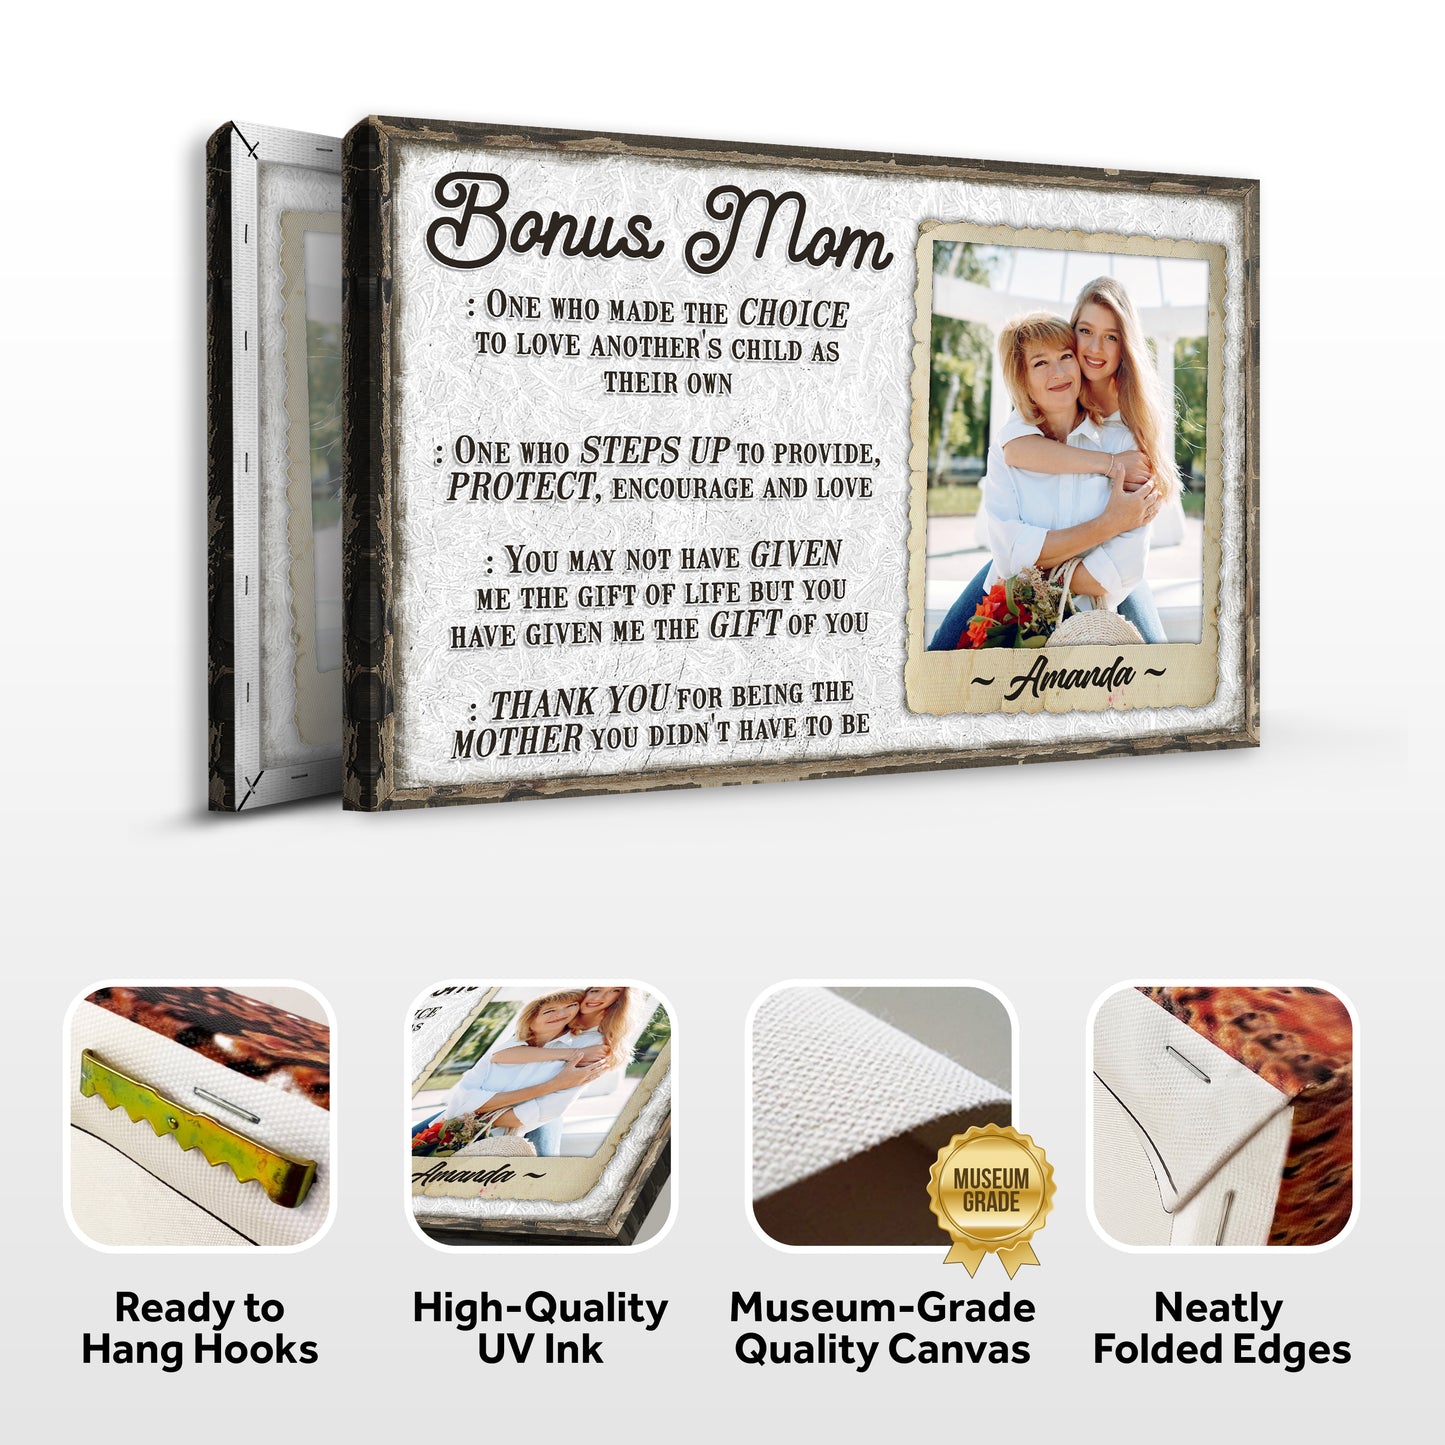 Bonus Mom Customized Sign Specs - Image by Tailored Canvases